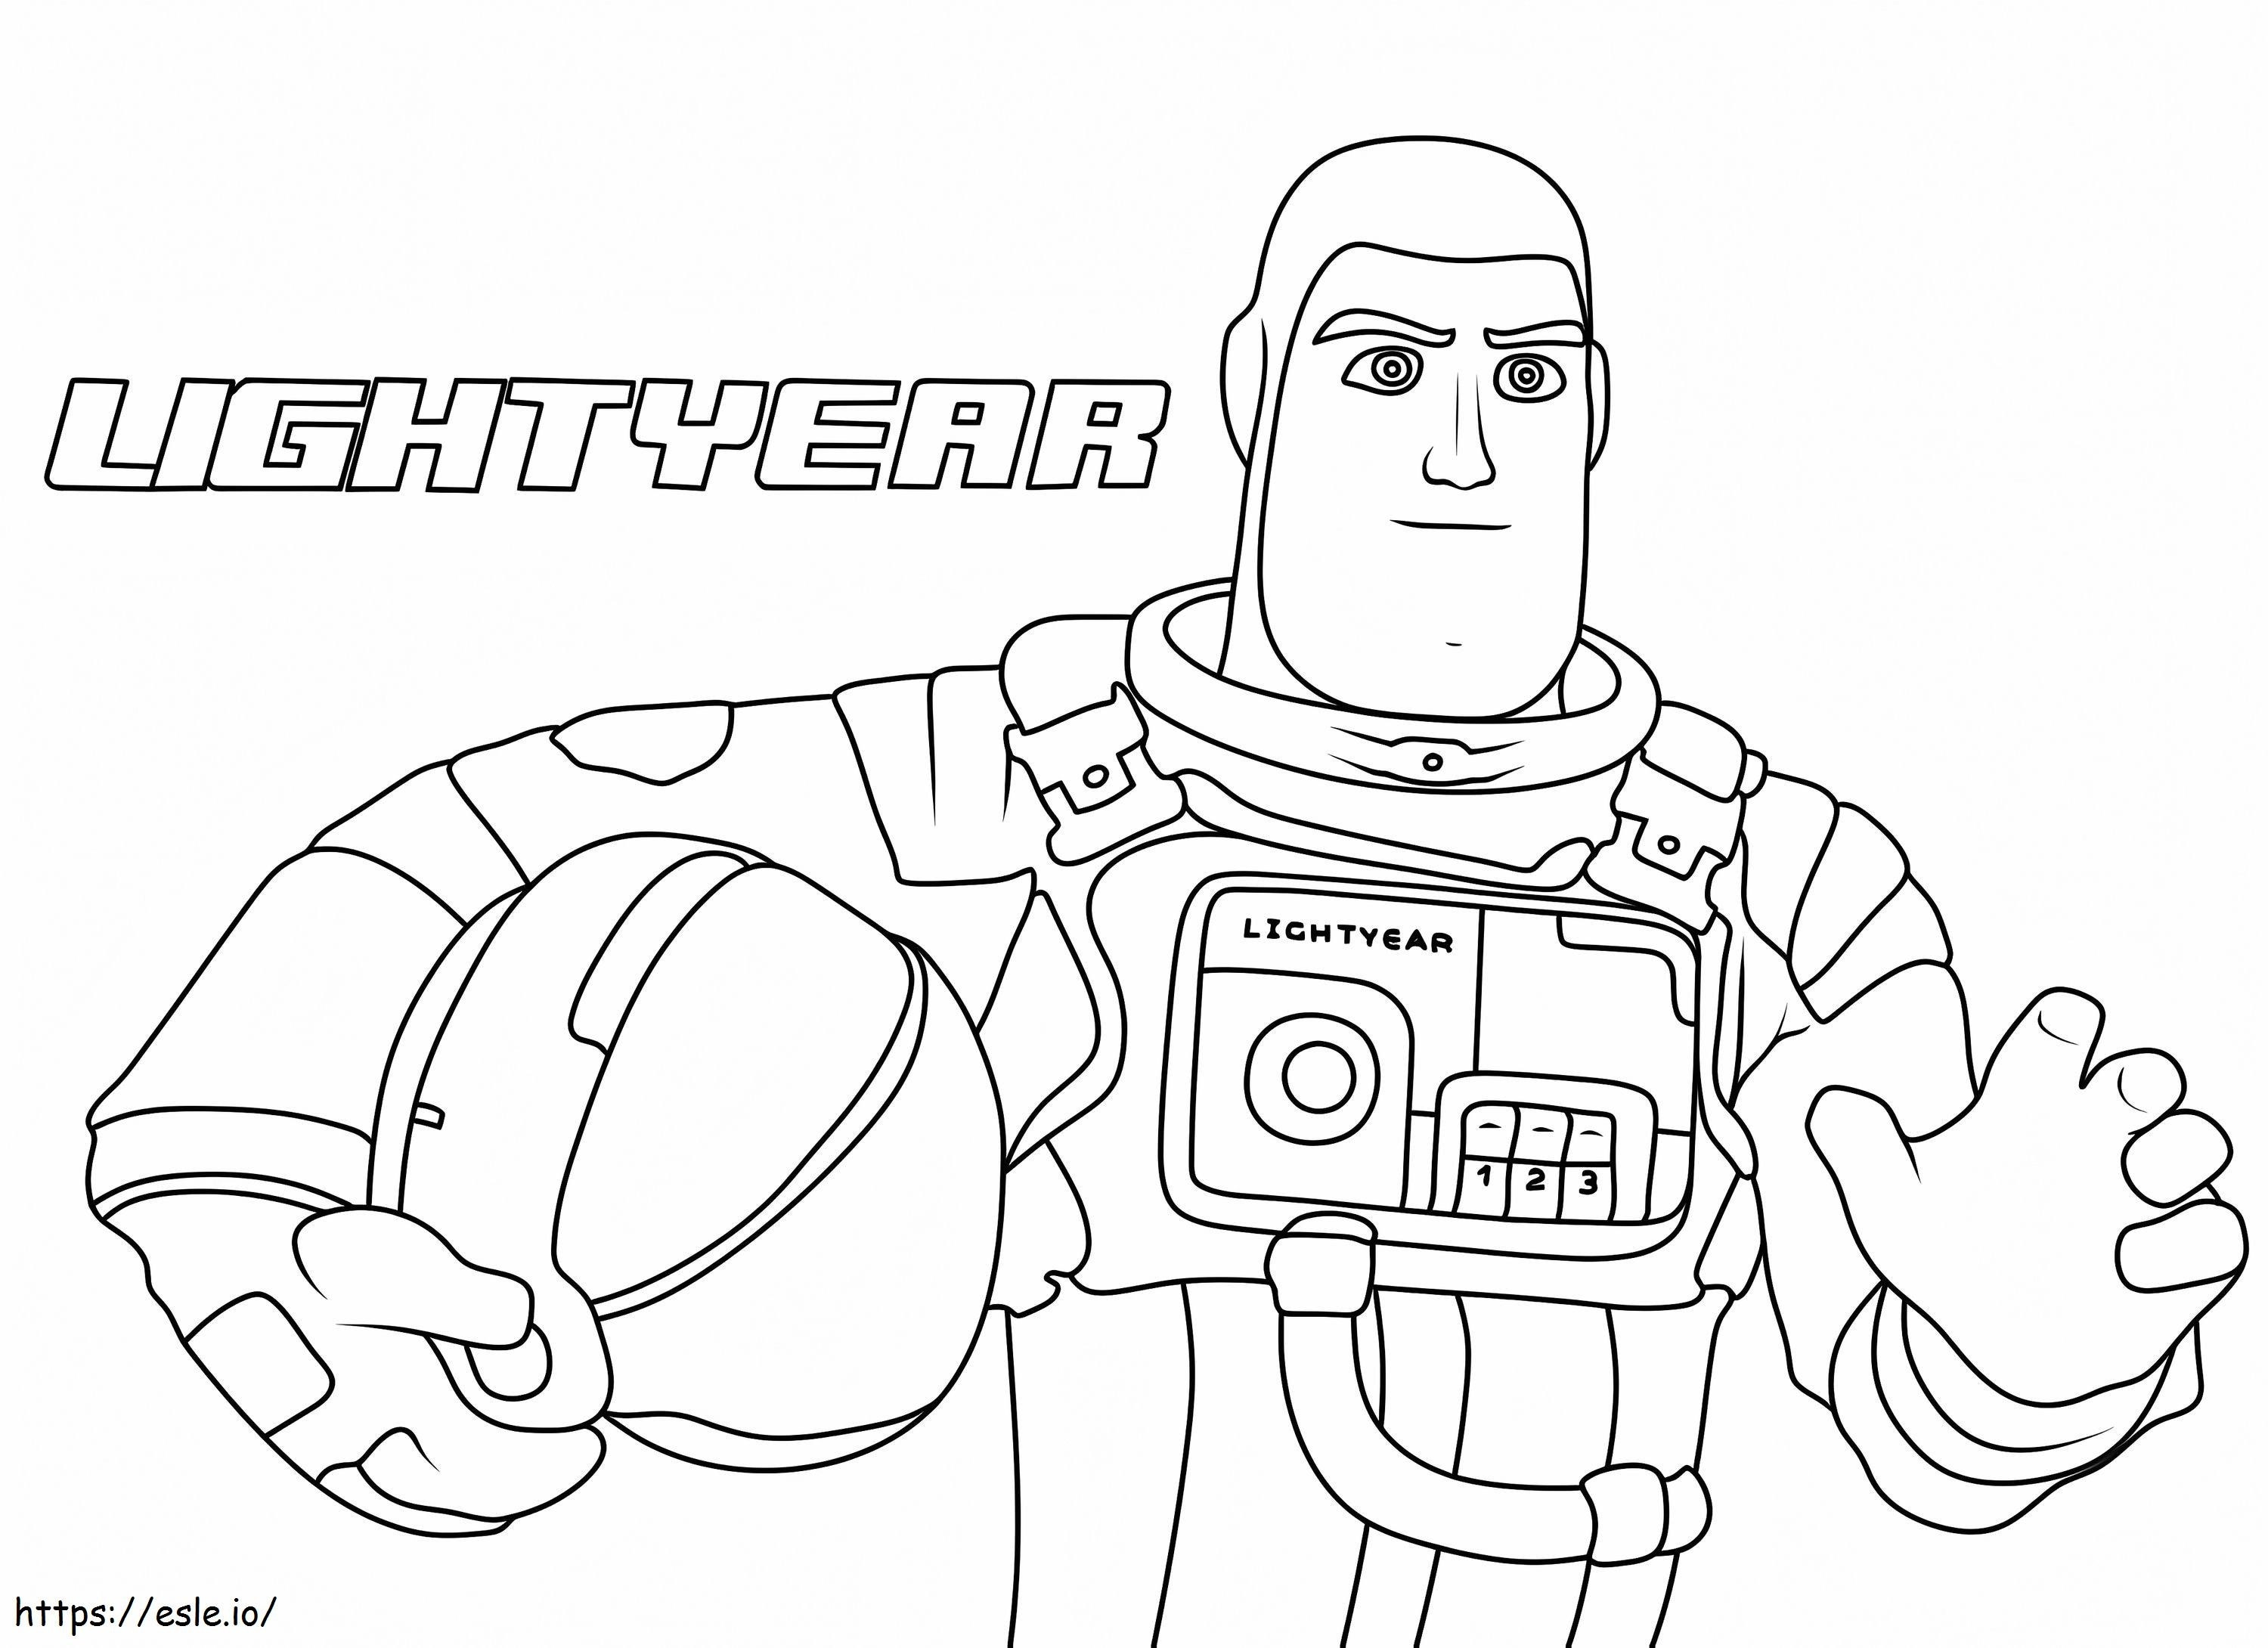 Printable Lightyear coloring page